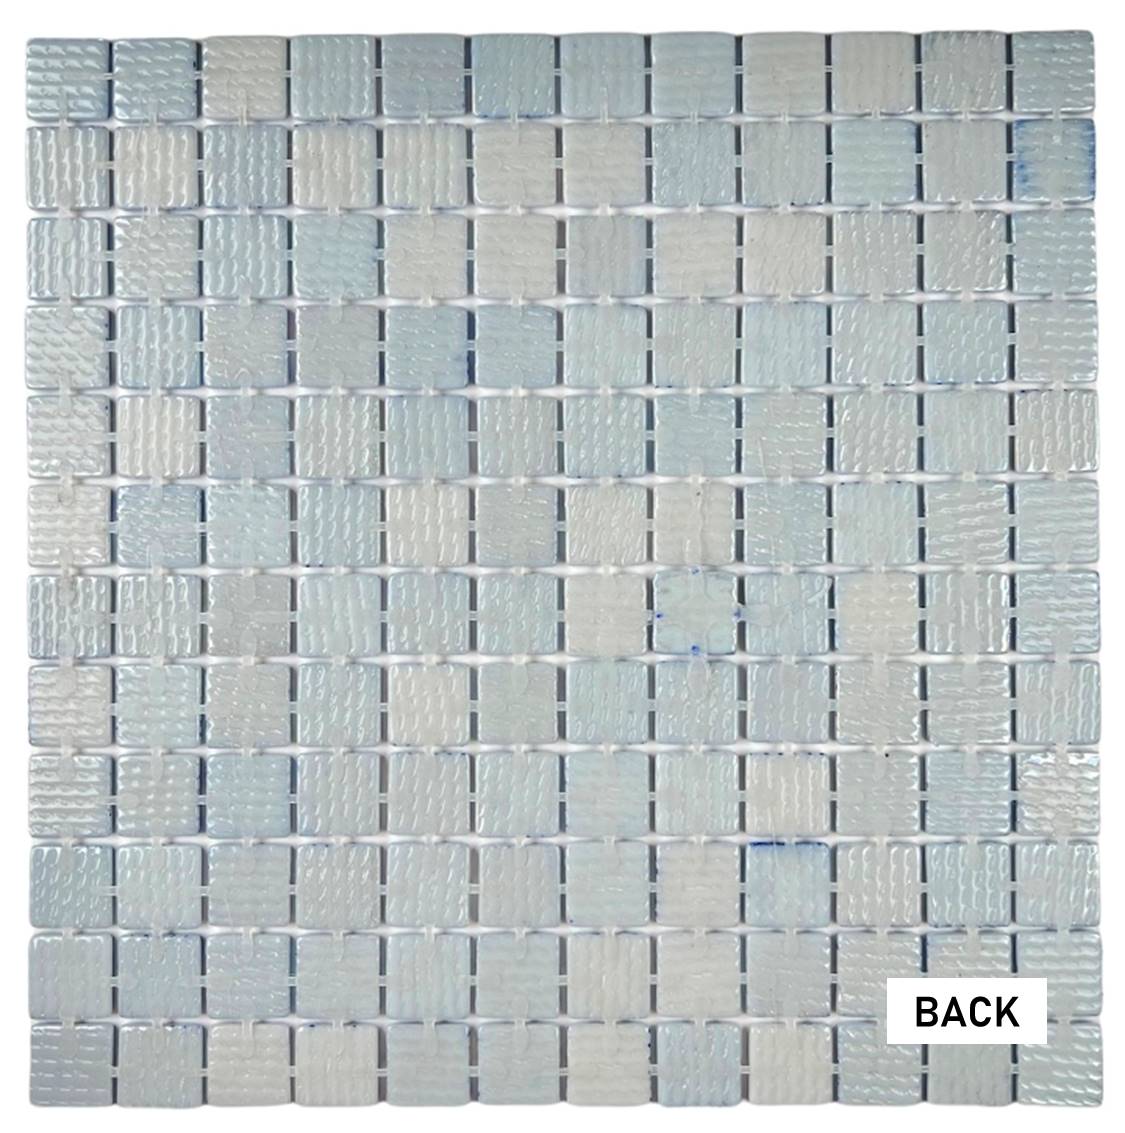 Mint Blue Recycled Glass Mosaic Floor Wall Tile Square 7/8 Inch Pattern for Kitchen Backsplash, Swimming Pool Tile, Bathroom Wall, Accent Wall